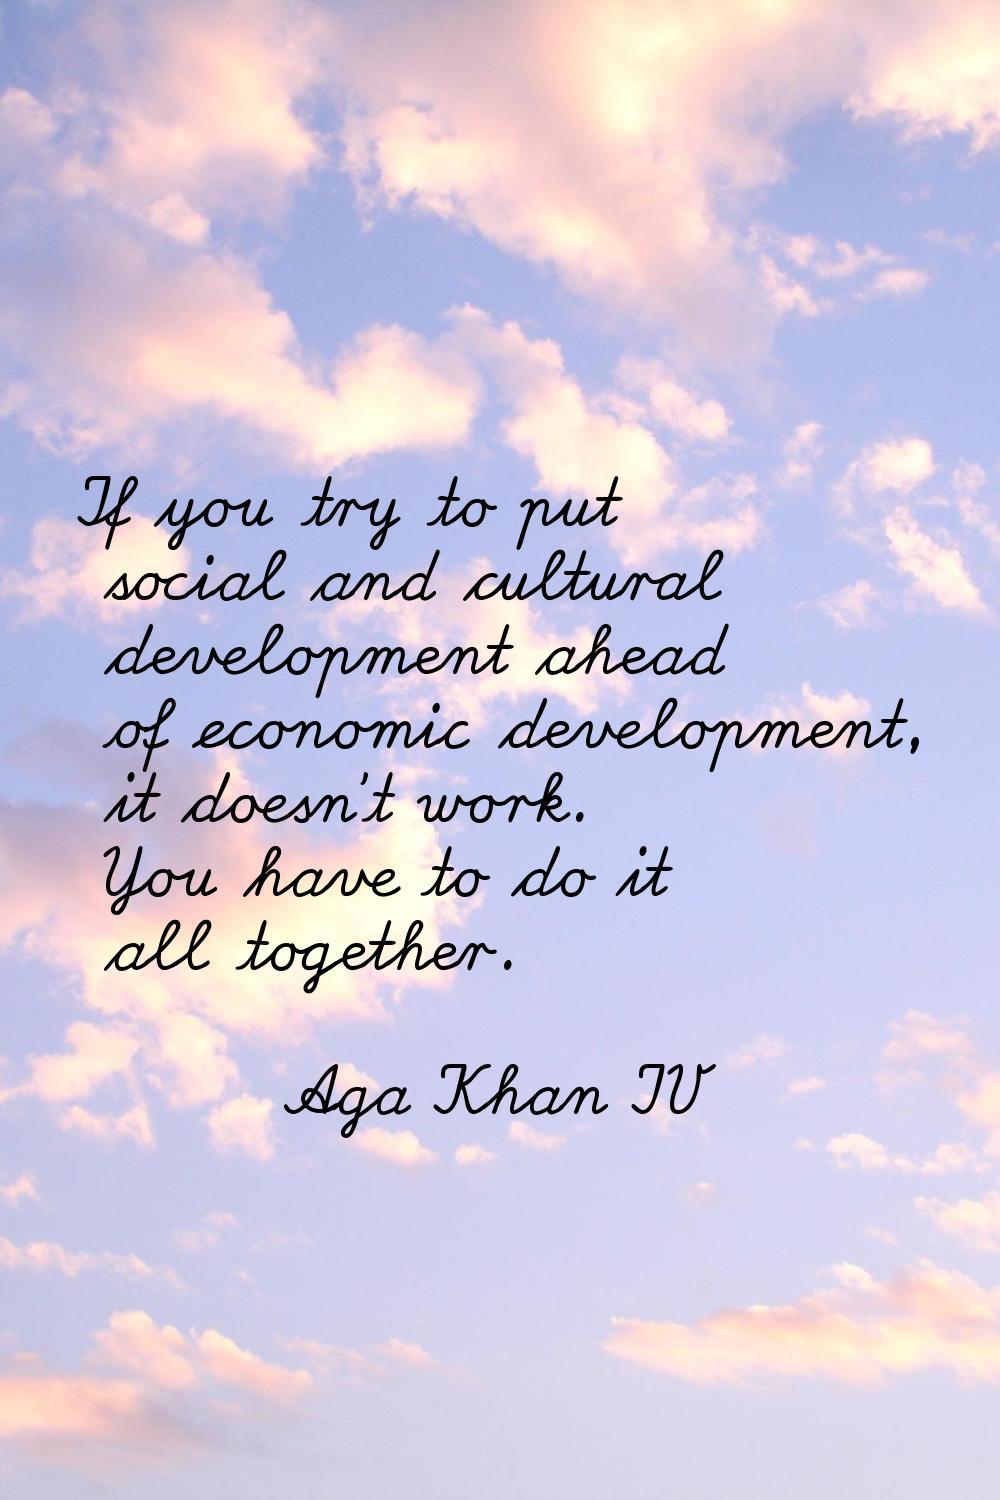 If you try to put social and cultural development ahead of economic development, it doesn't work. Y